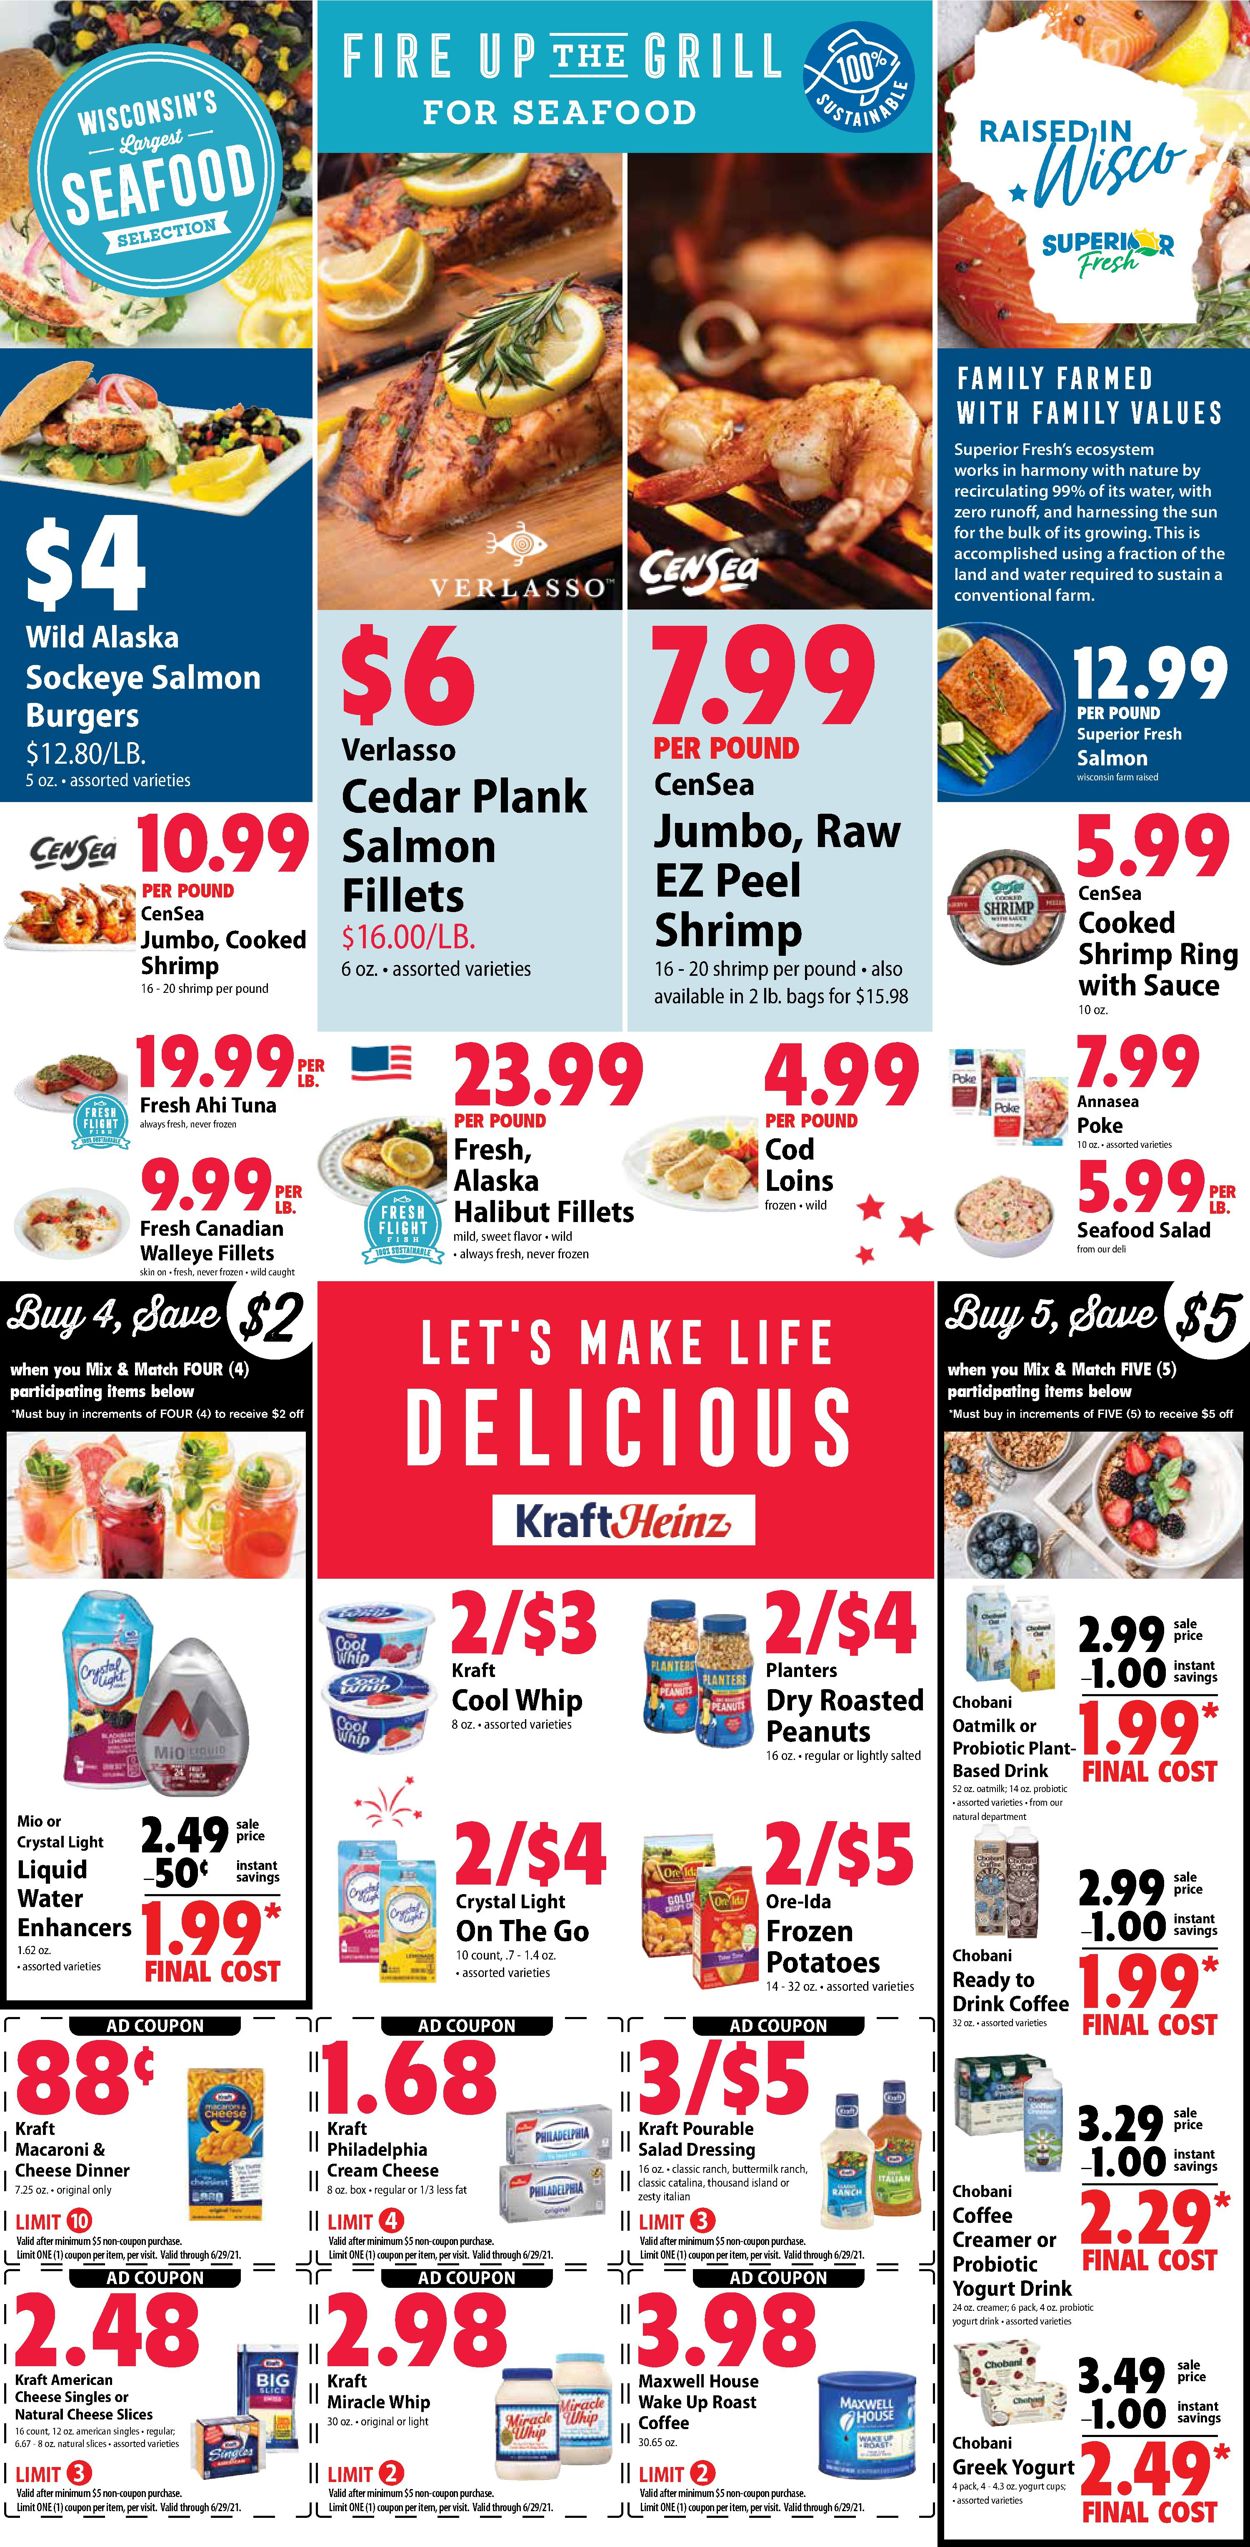 Festival Foods Current weekly ad 06/23 - 06/29/2021 [3] - frequent-ads.com